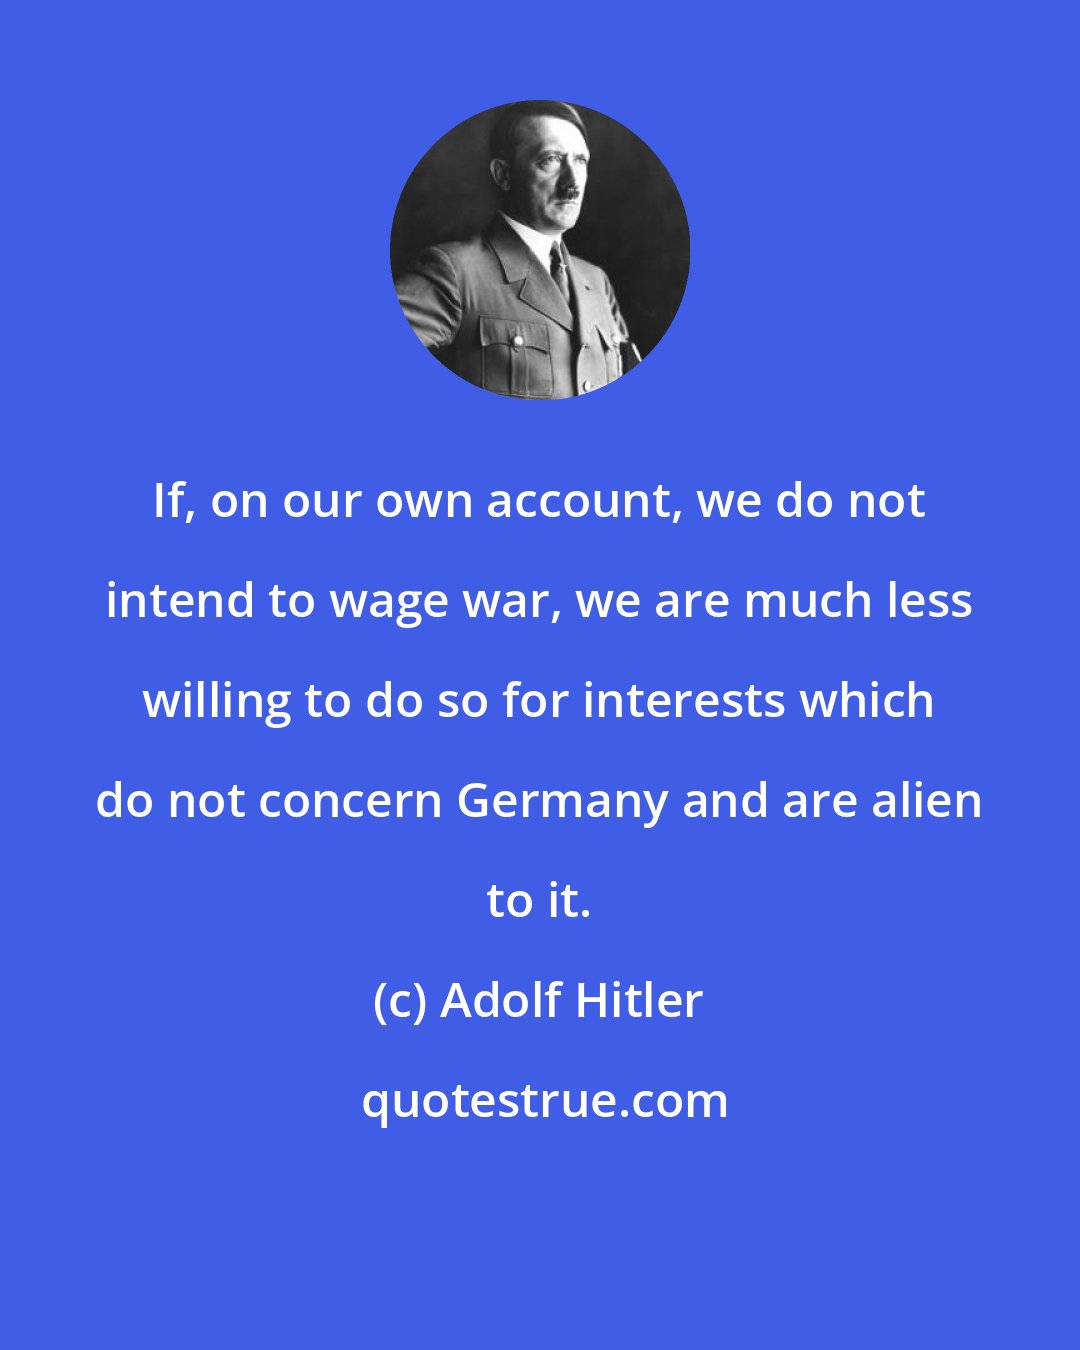 Adolf Hitler: If, on our own account, we do not intend to wage war, we are much less willing to do so for interests which do not concern Germany and are alien to it.